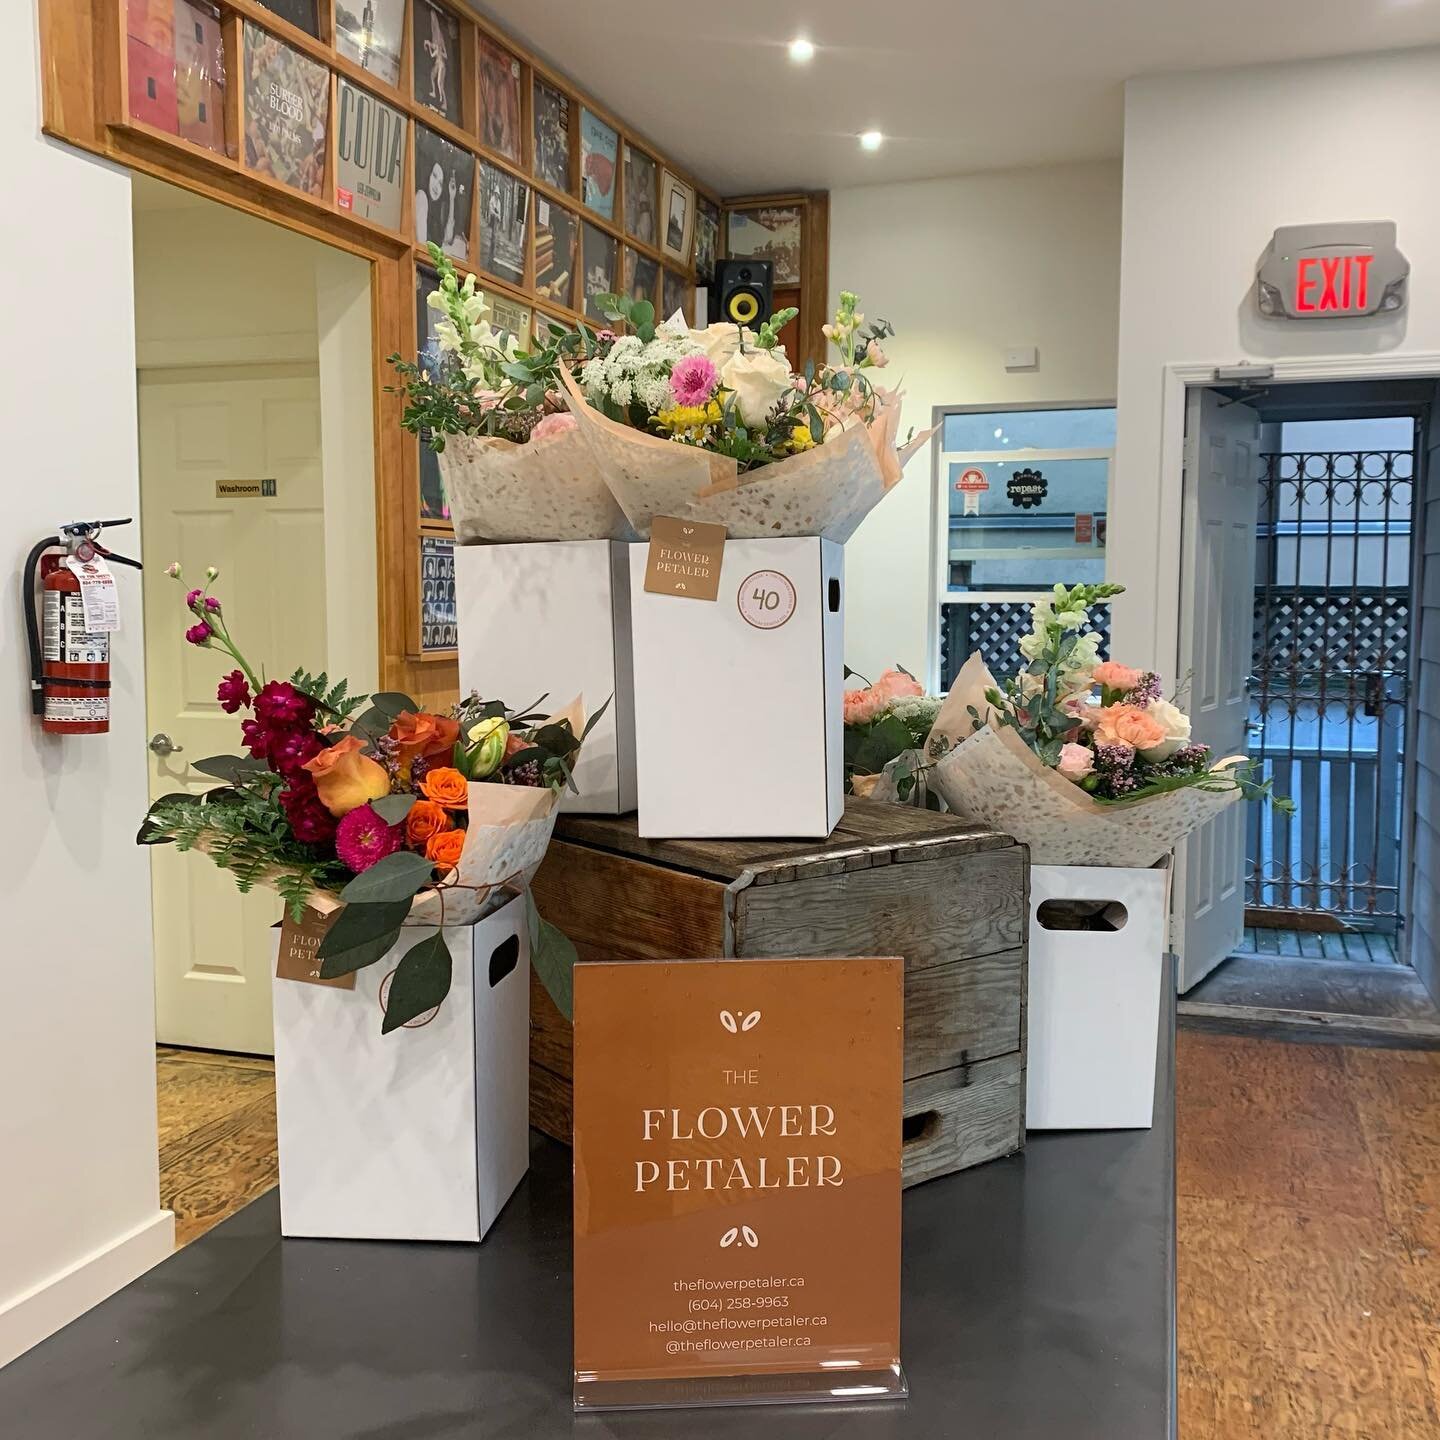 Mama&rsquo;s flowers and Greenhorn gift card are ready to go! #westend #localbusiness #espresso #brunch #mothersday @theflowerpetaler.ca #greenhorn